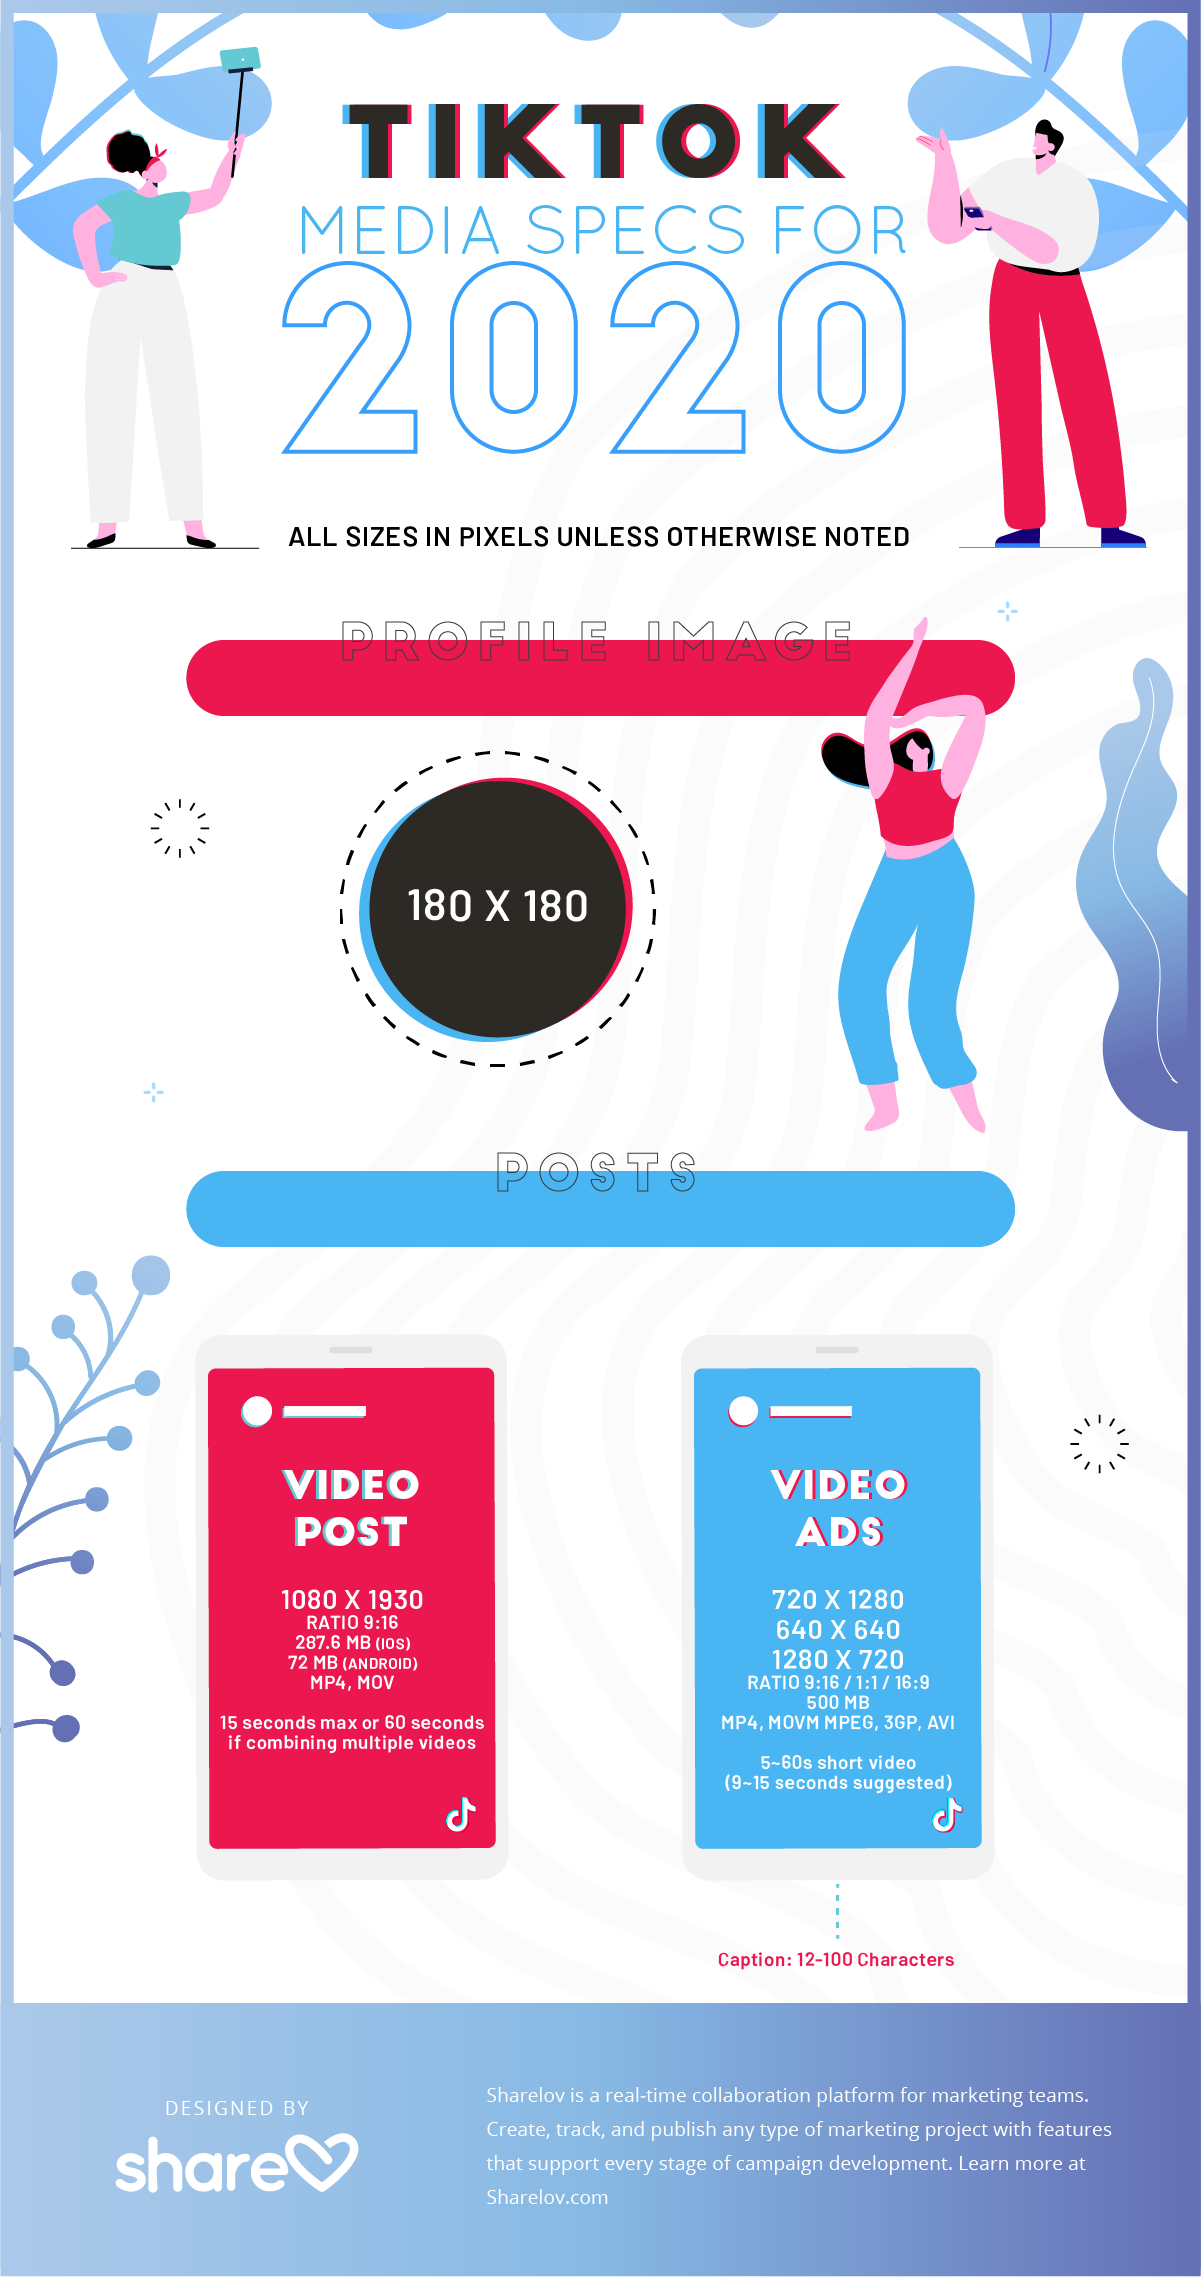 Complete Guide To Social Media Image Sizes For 2020